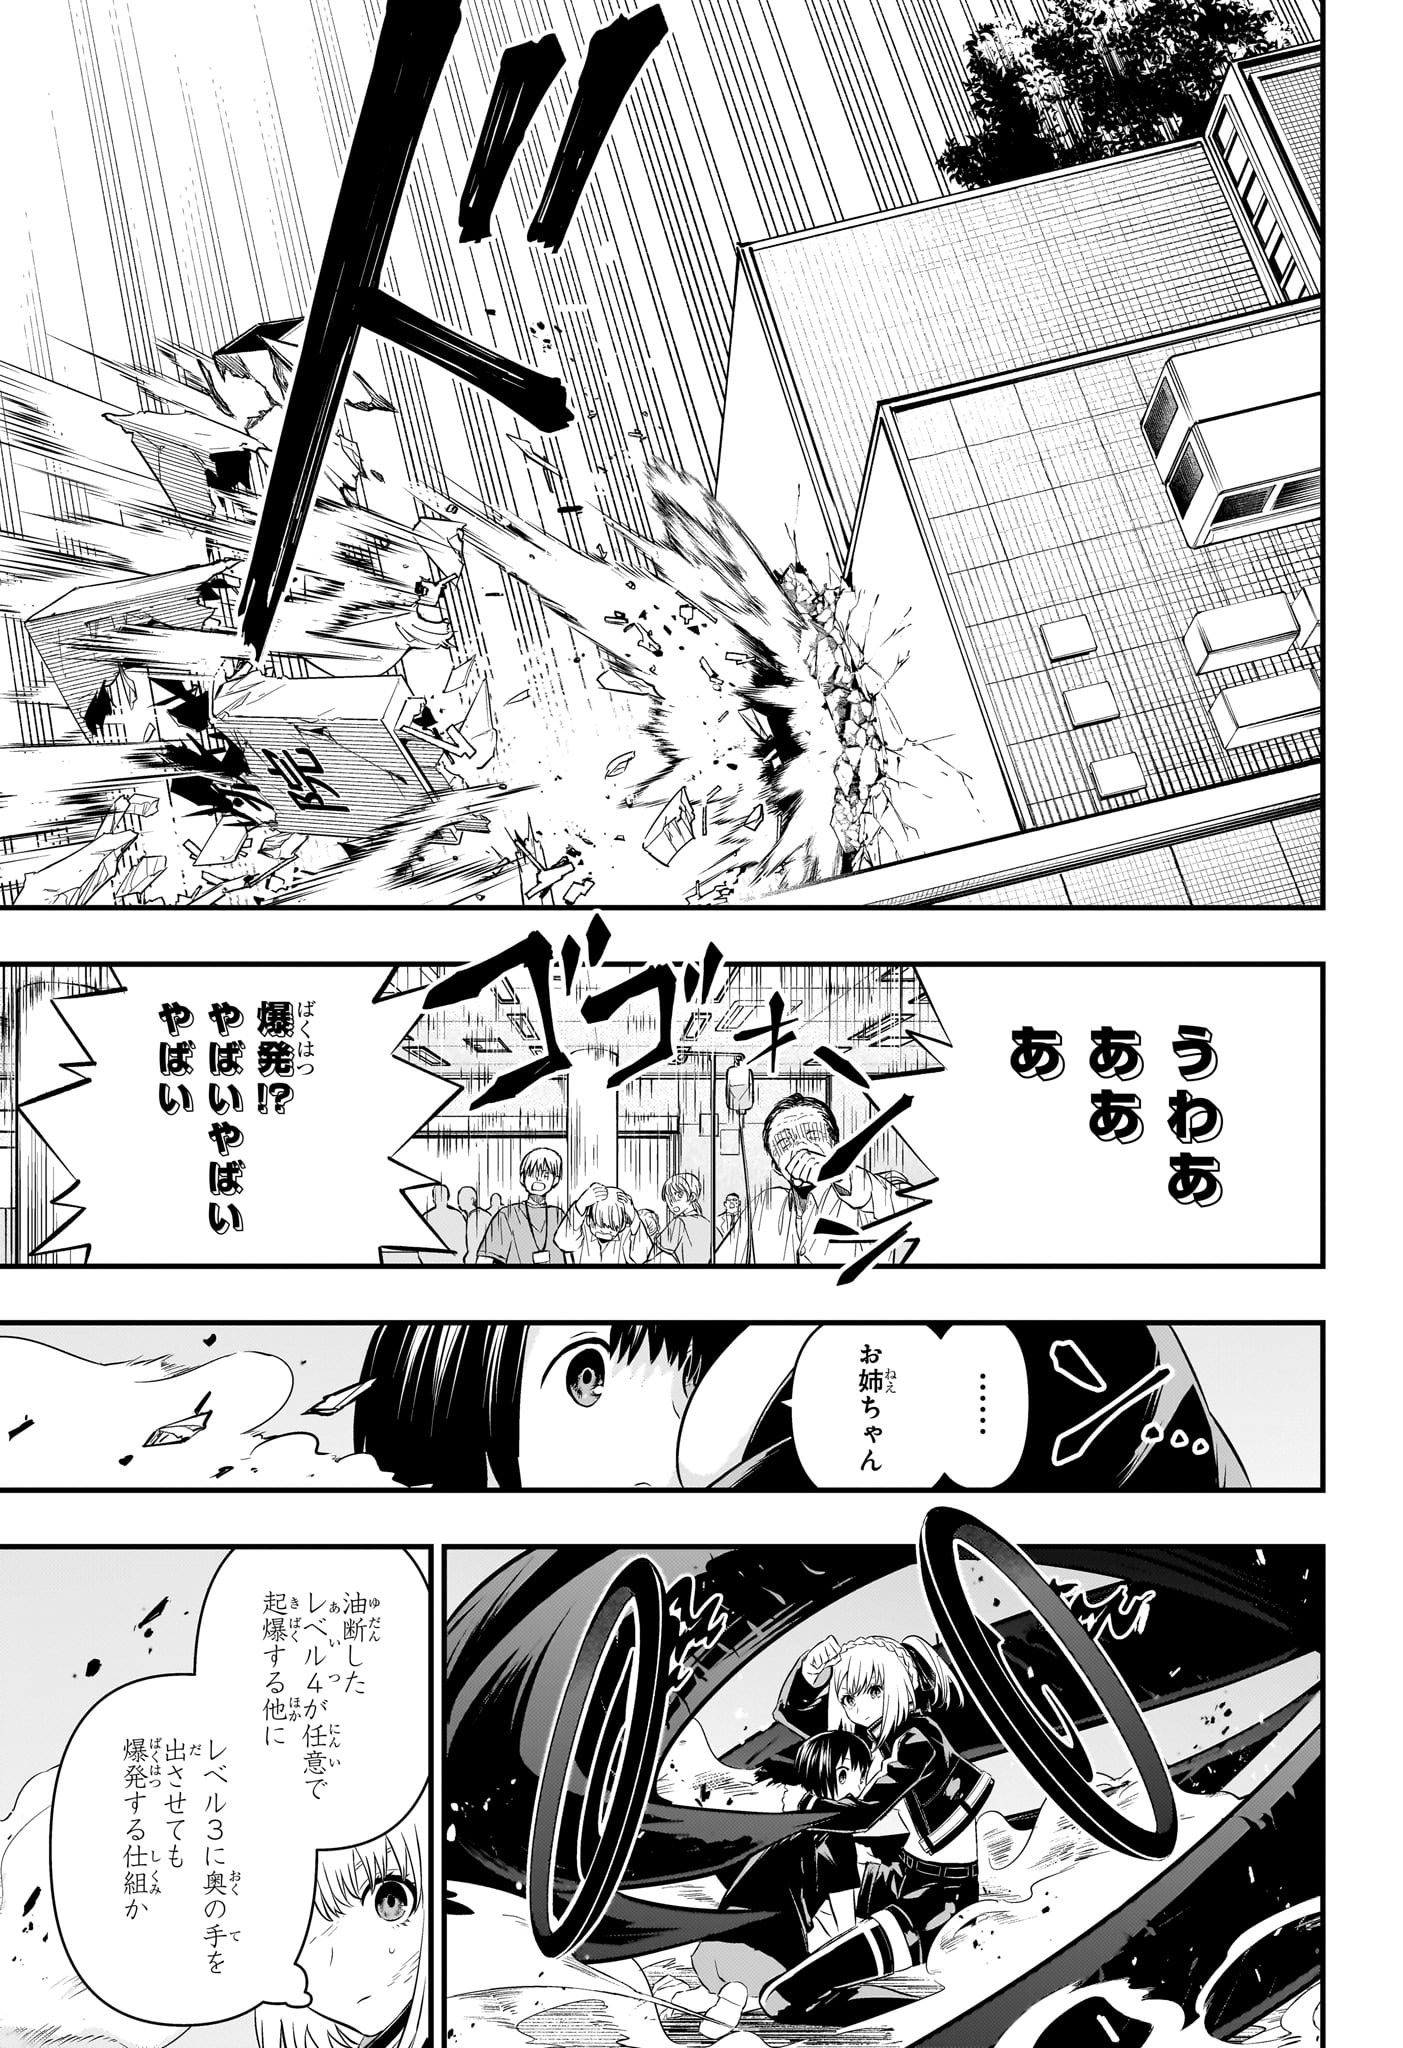 Nue no Onmyouji - Chapter 54 - Page 17